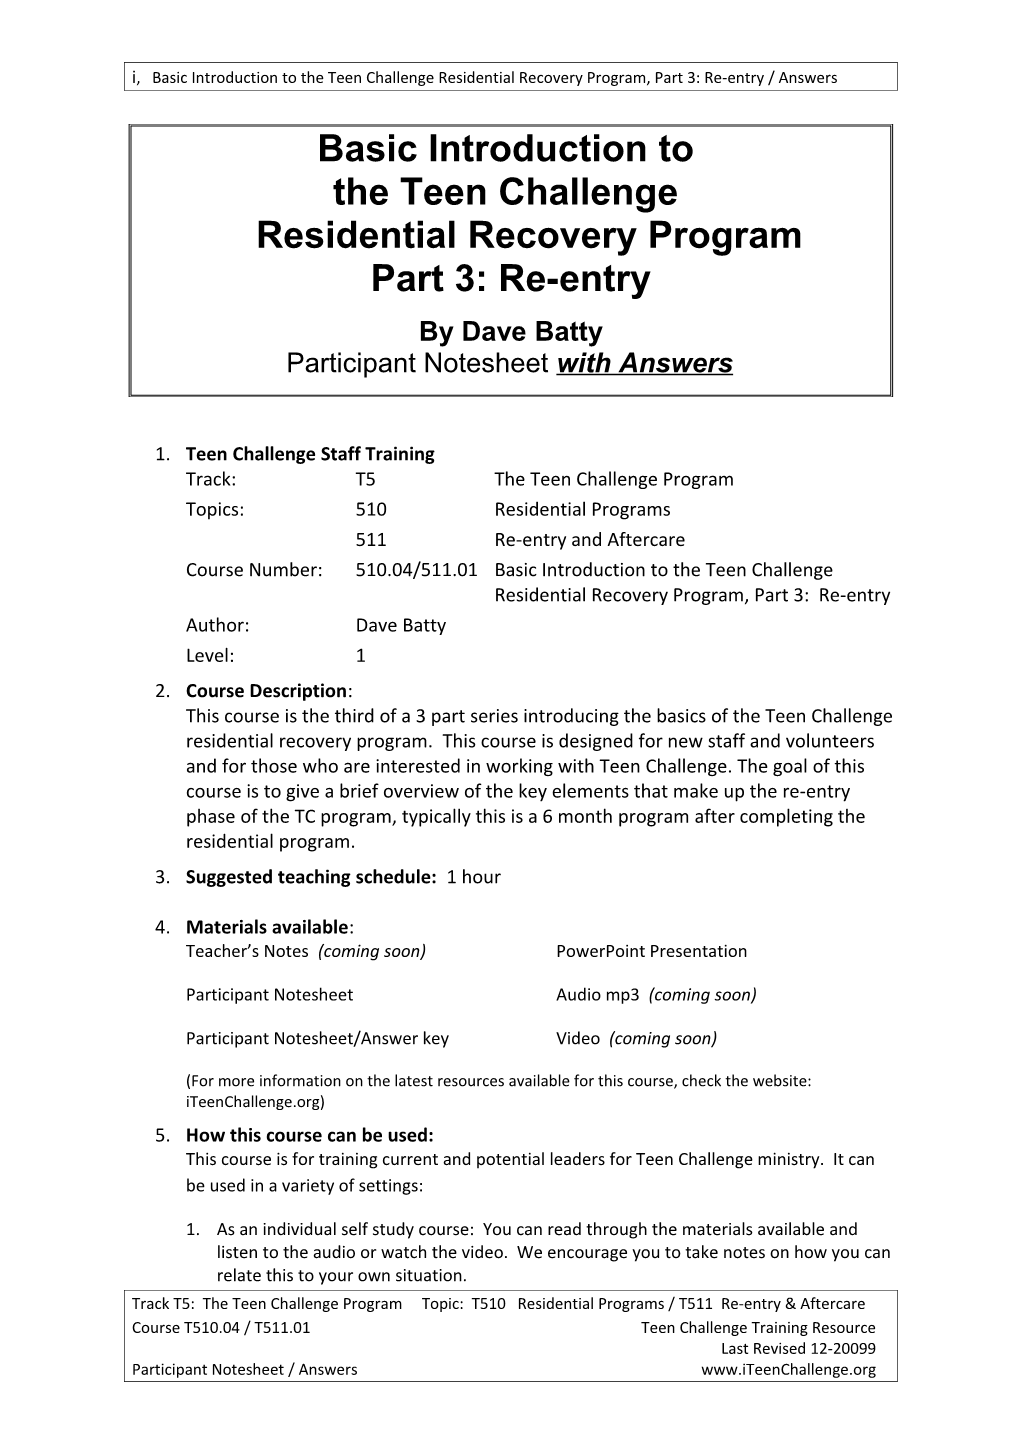 I, Basic Introduction to the Teen Challenge Residential Recovery Program, Part 3: Re-Entry